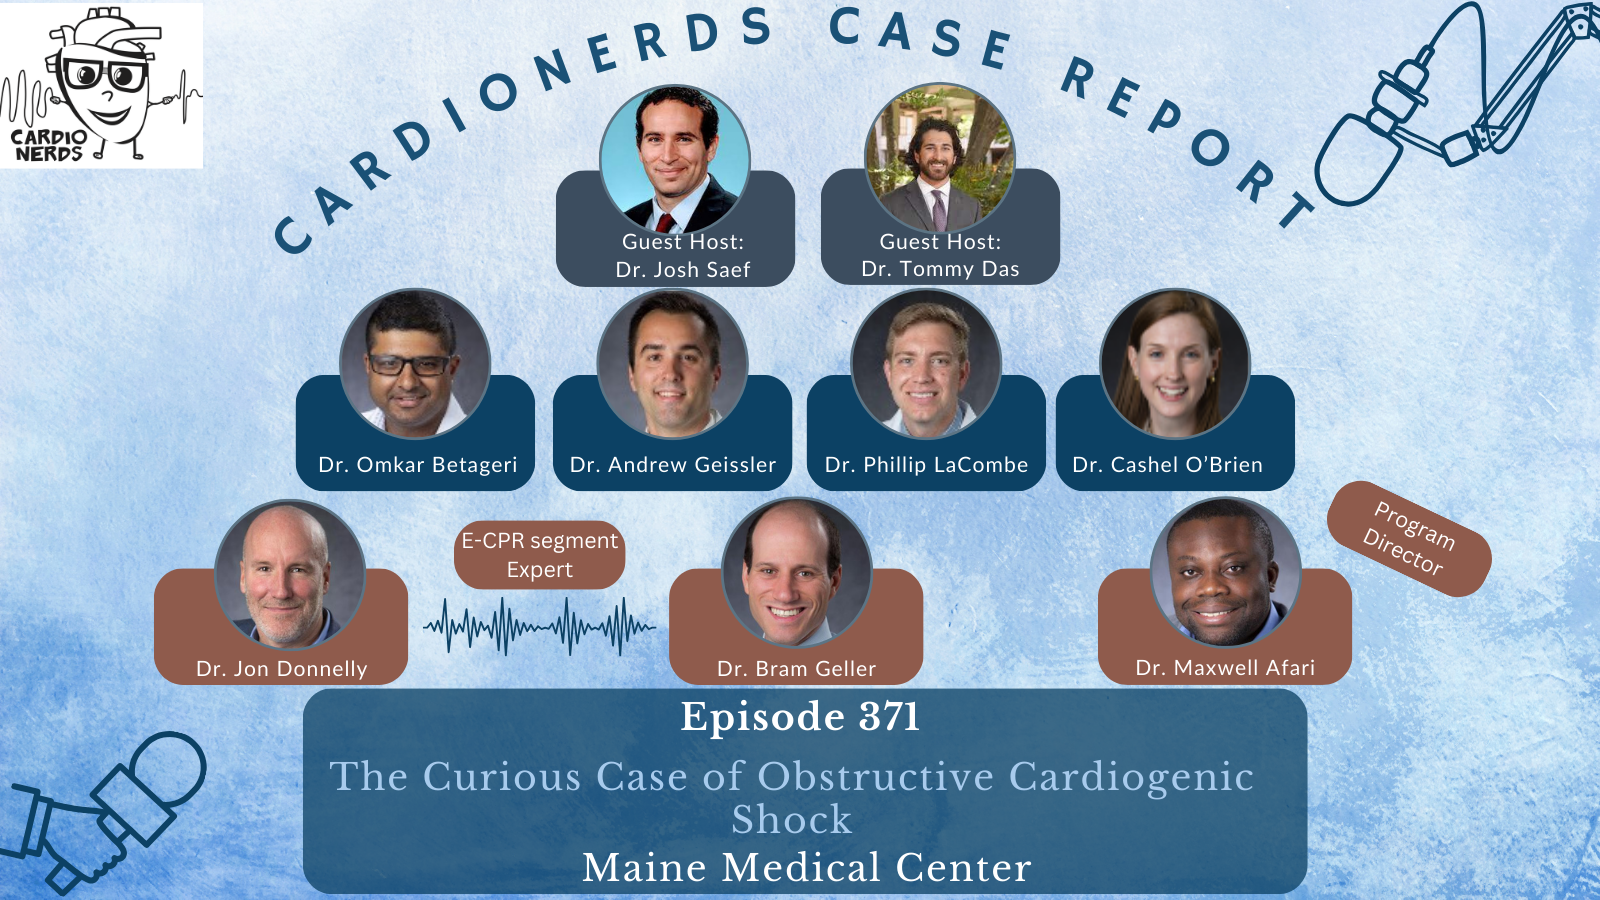 The Curious Case of Obstructive Cardiogenic Shock - Maine Medical Center